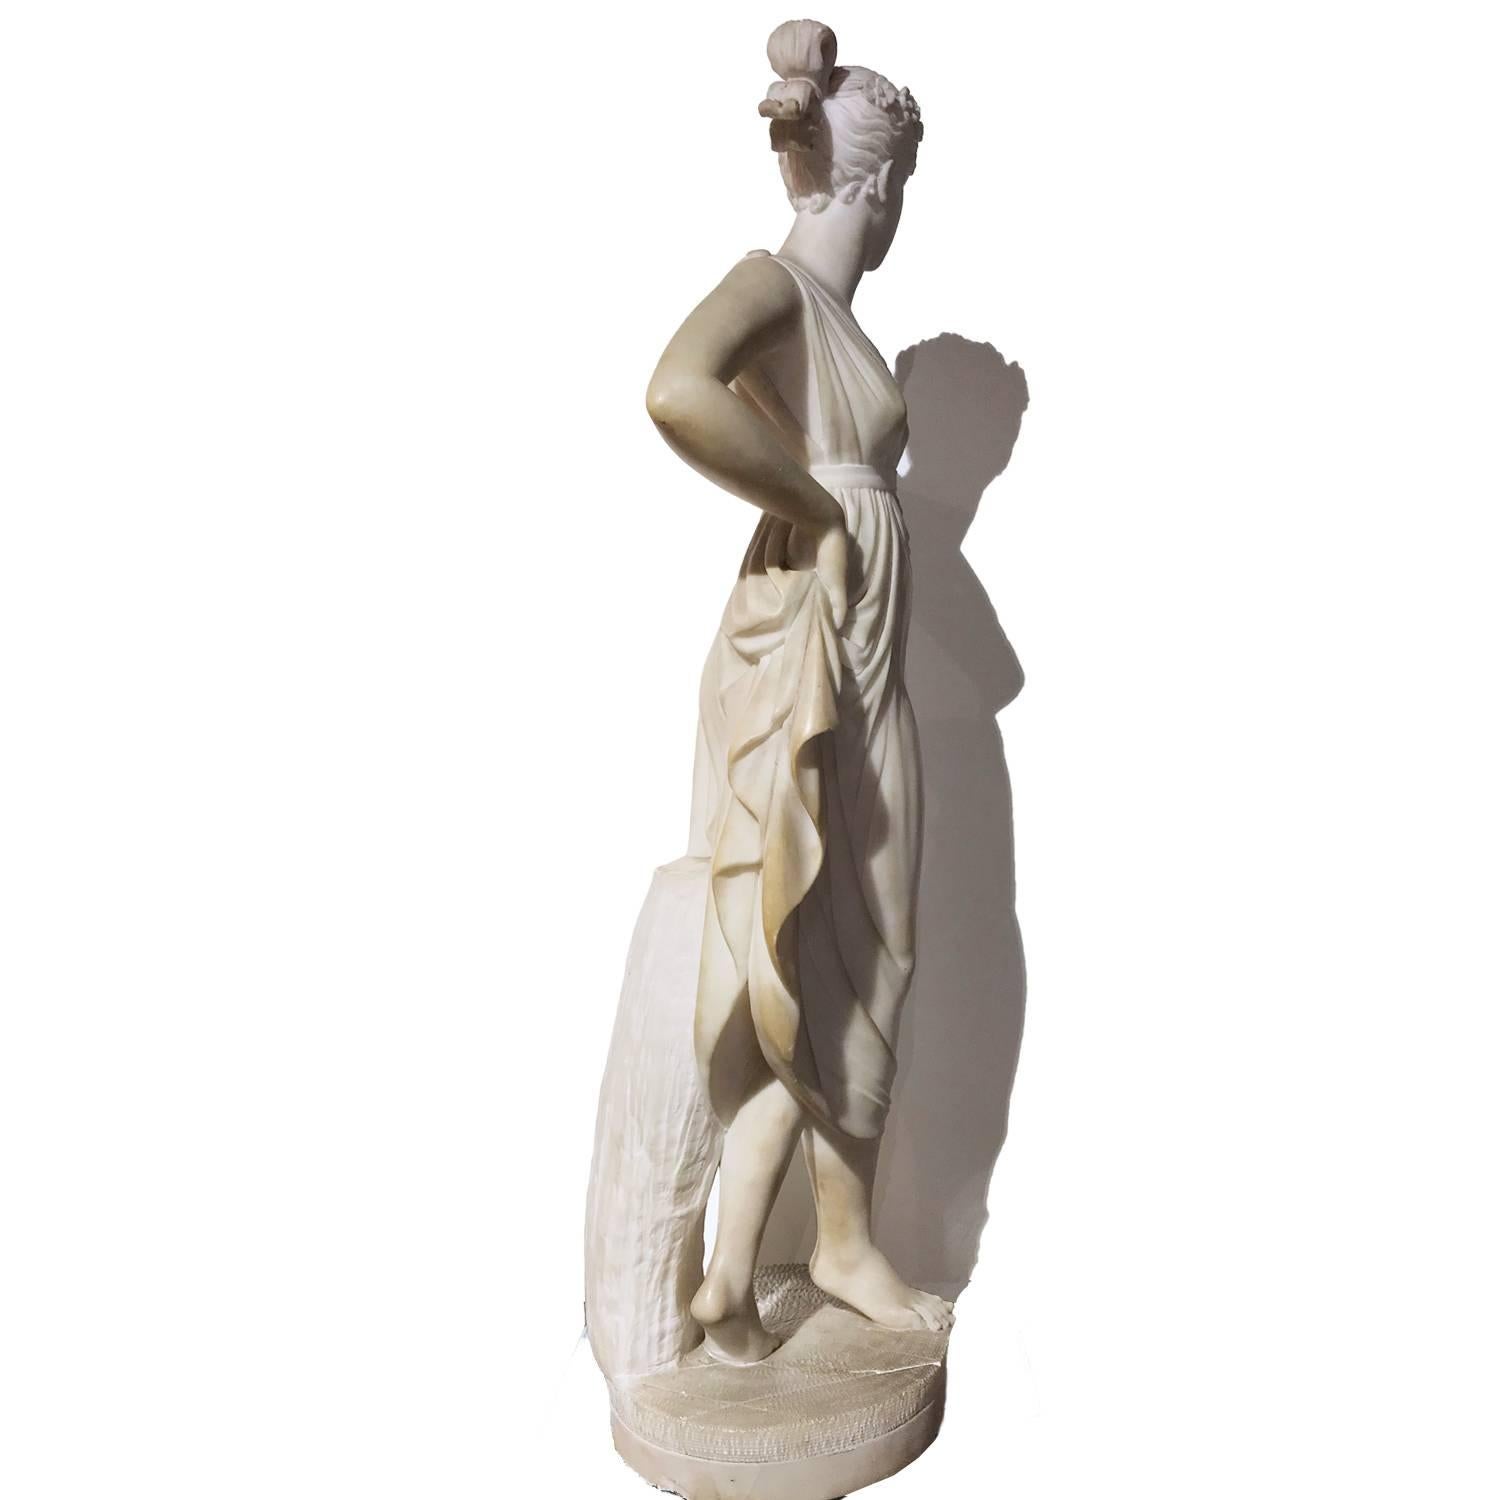 Hand-Carved Italian Neoclassical Alabaster Sculpture of Dancer after Antonio Canova